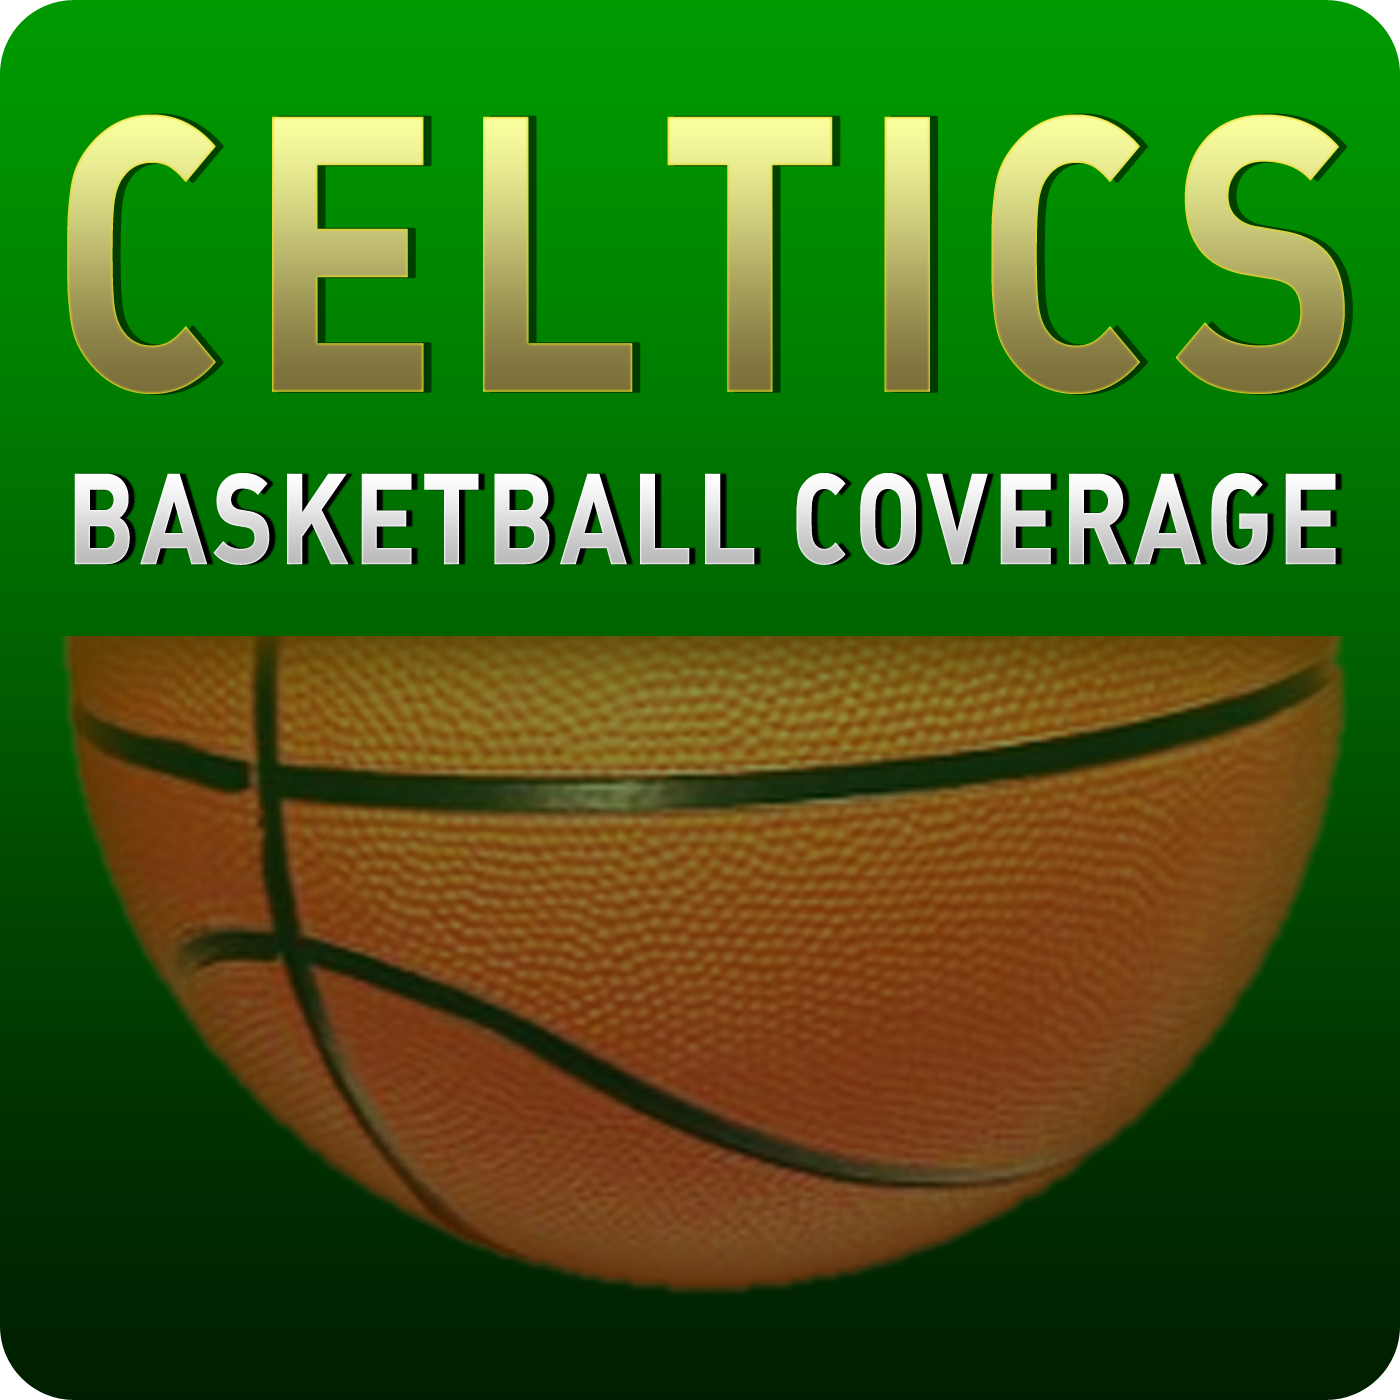 Dale & Keefe - Kendrick Perkins believes the Celtics can go toe to toe with anyone in the East